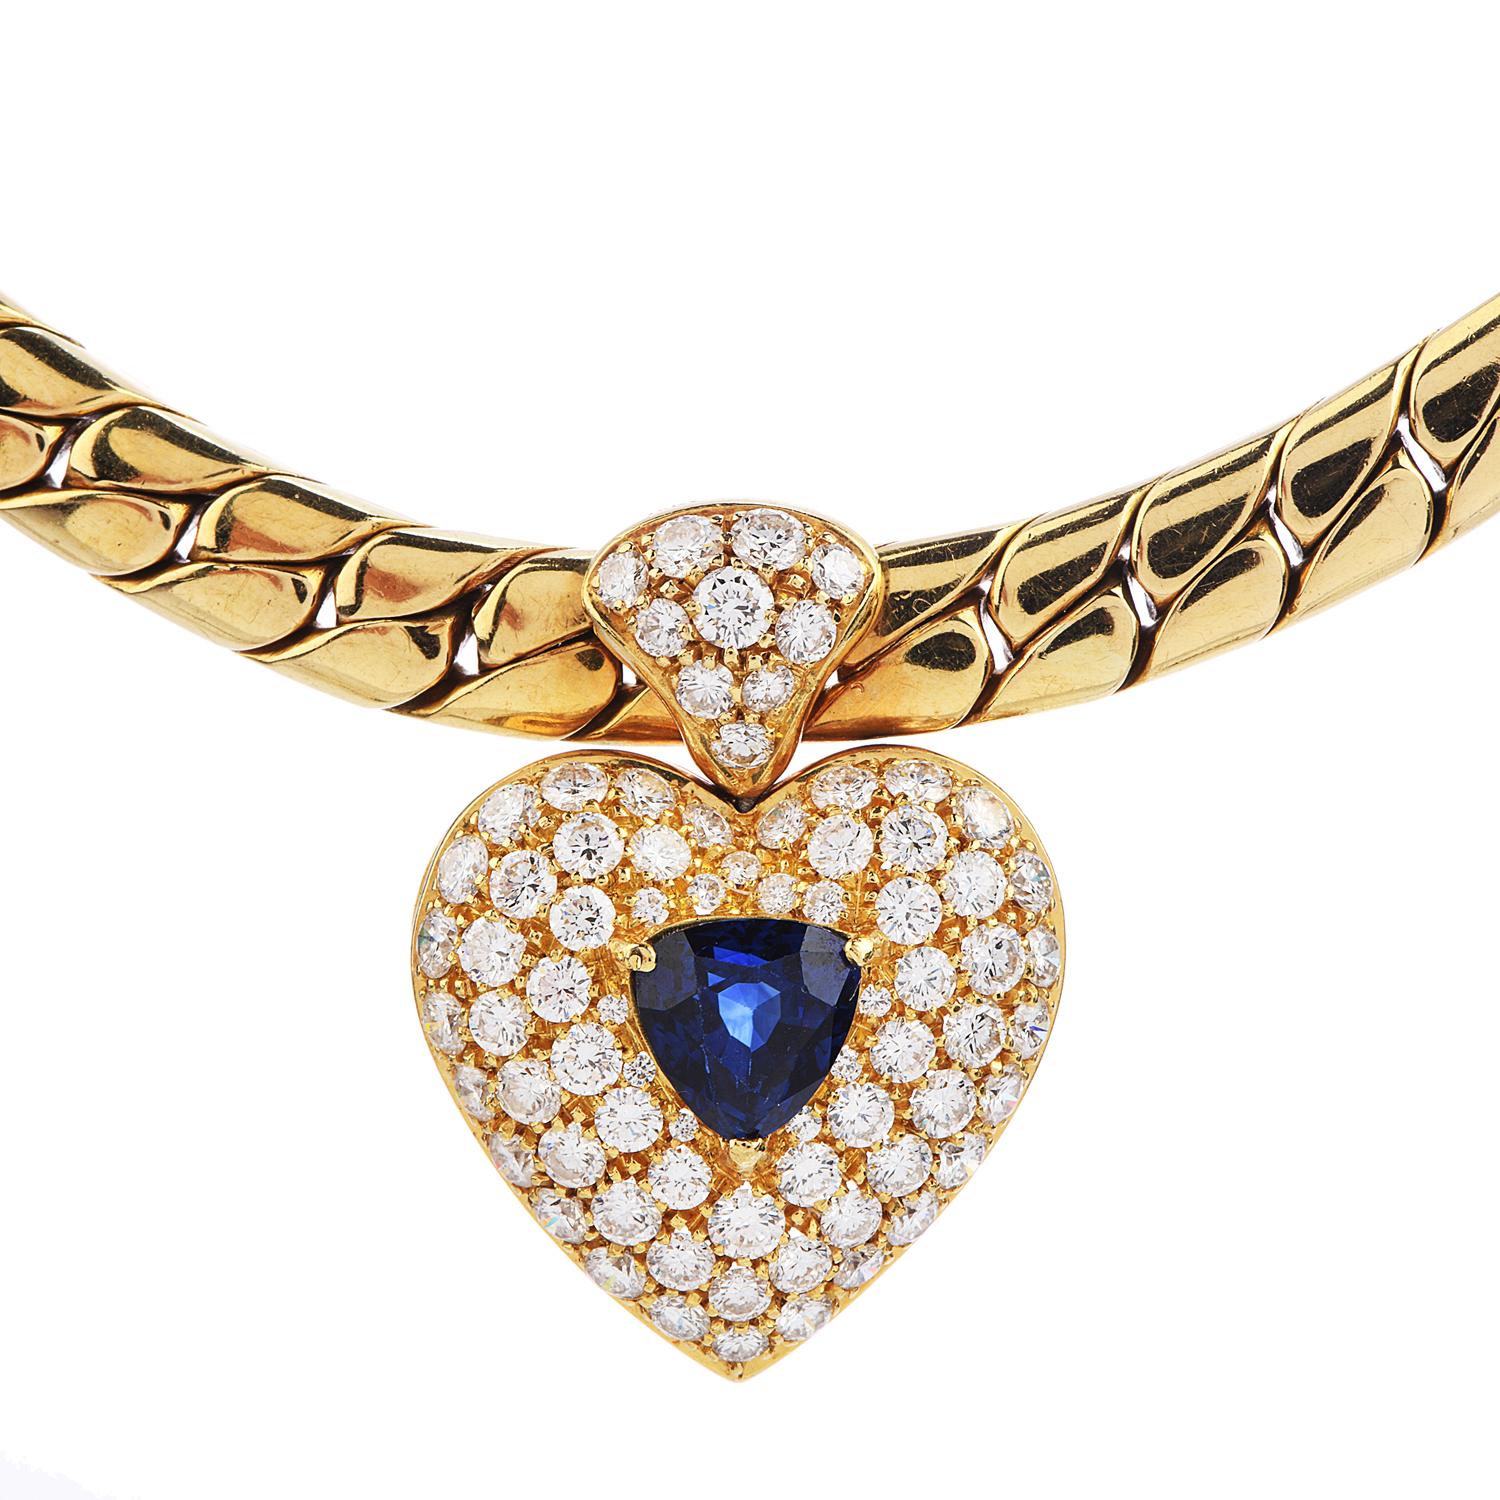 This vintage Diamond & Blue Sapphire Heart Inspired Pendant with a cerb Link Chain Necklace,

It is crafted in solid 18K Yellow Gold and weighs 68.5 grams. This 1980's Piece showcases a smooth set of 76 round-cut diamonds weighing approx.